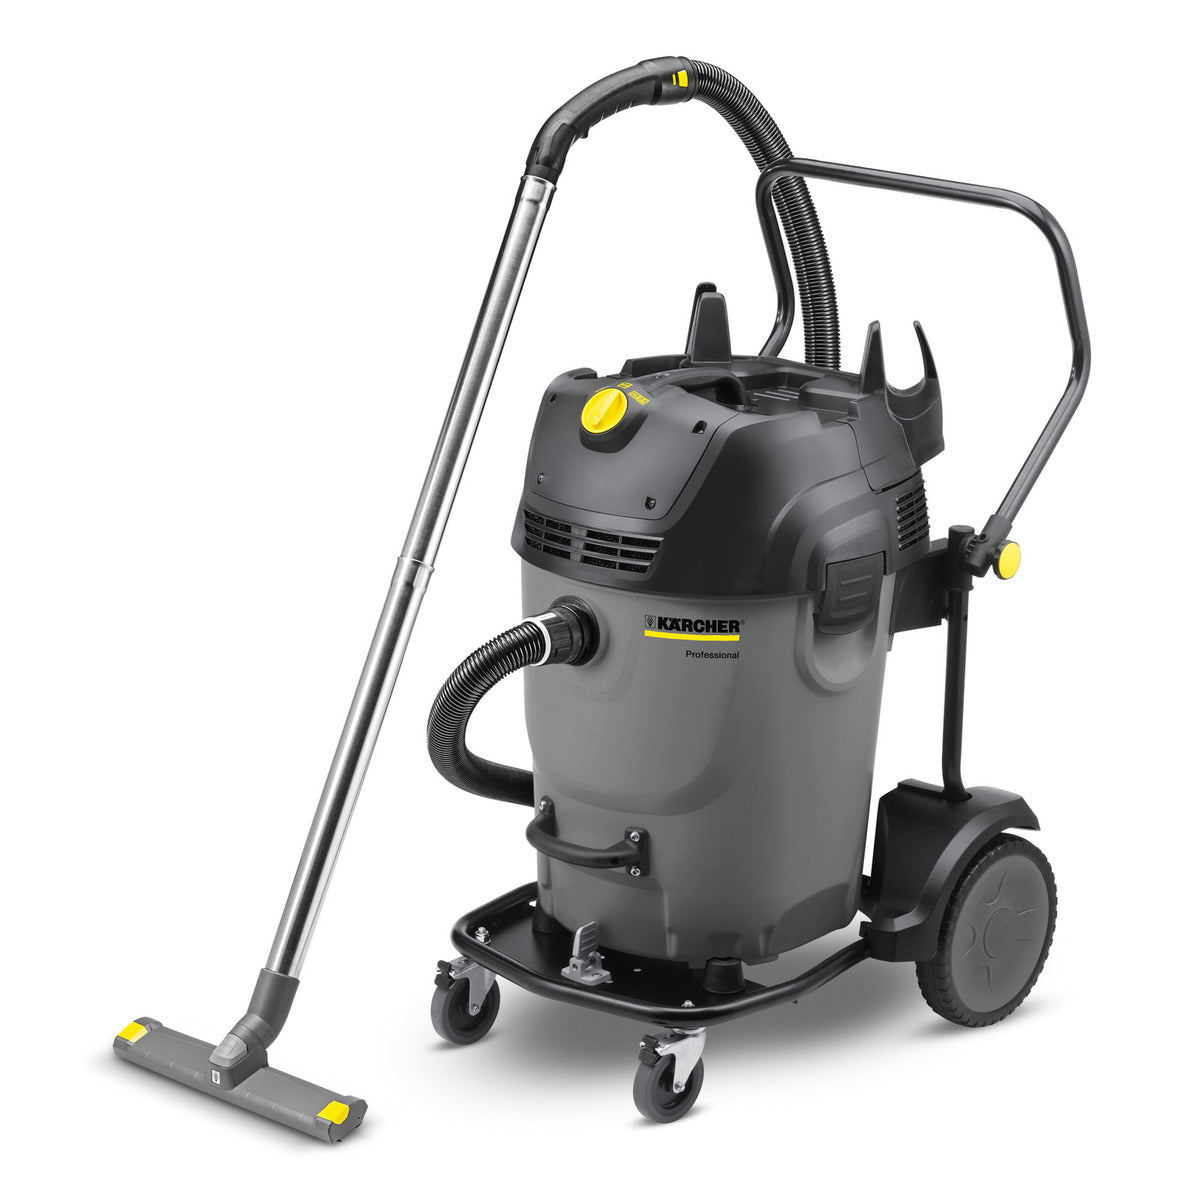 Kärcher wet and dry vacuum cleaner NT 65/2 Tact² Tc